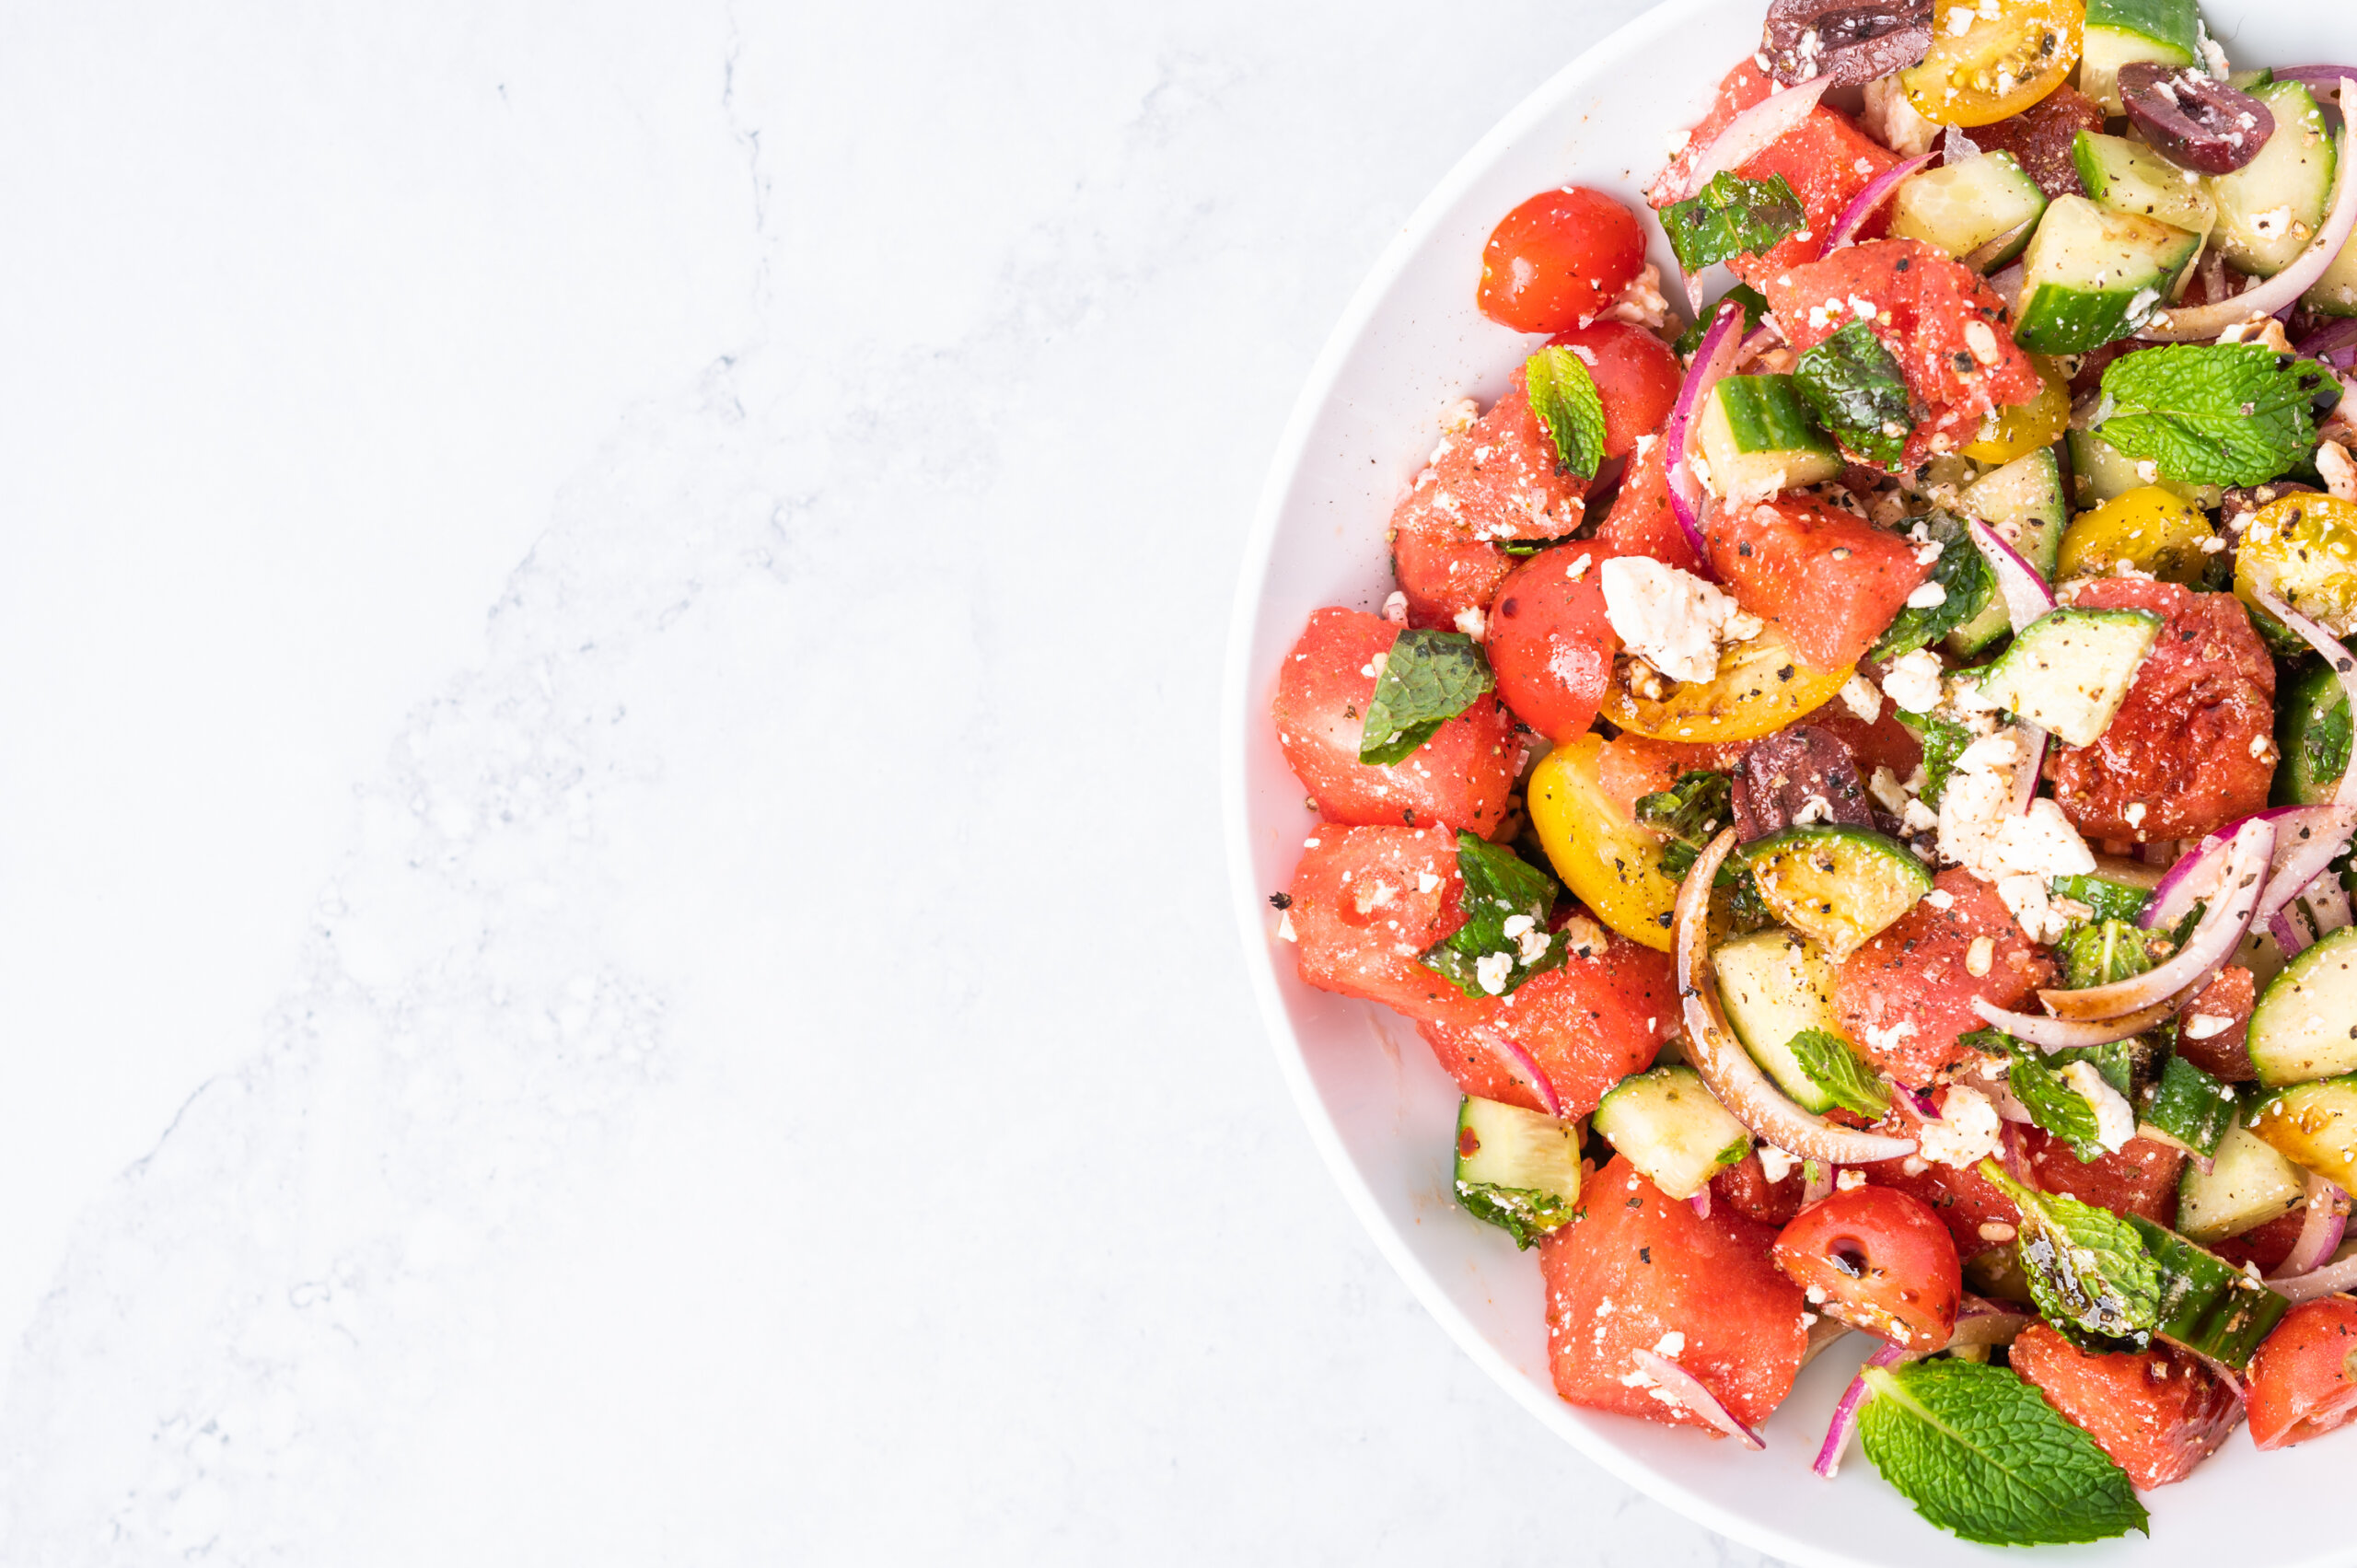 A bowl of watermelon and tomato salad on a marble counter